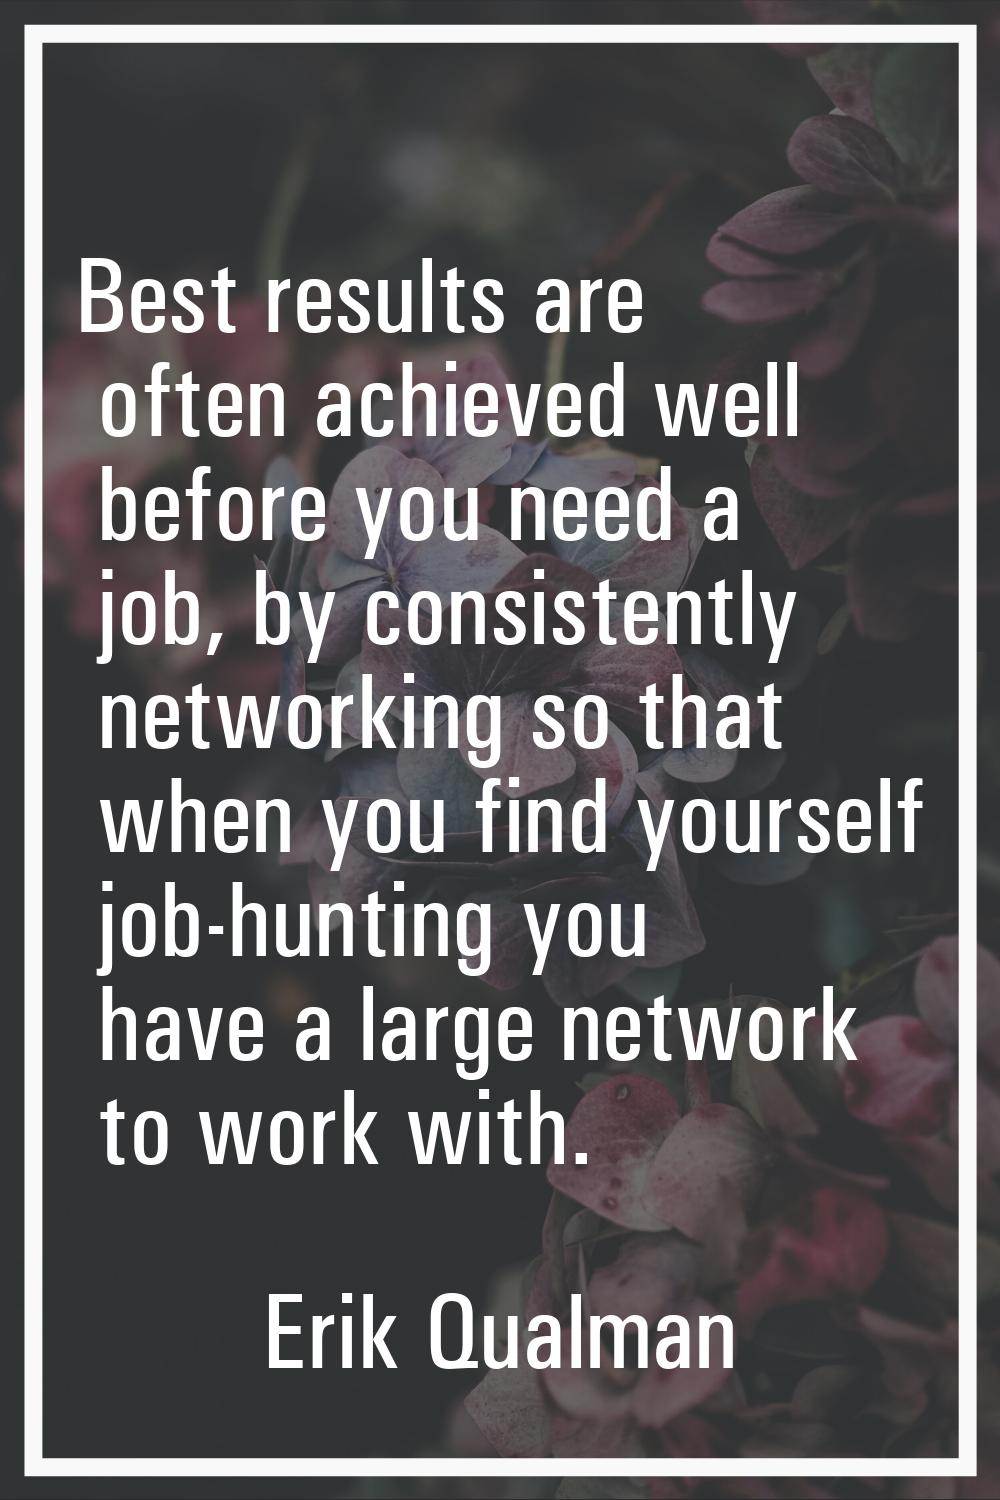 Best results are often achieved well before you need a job, by consistently networking so that when